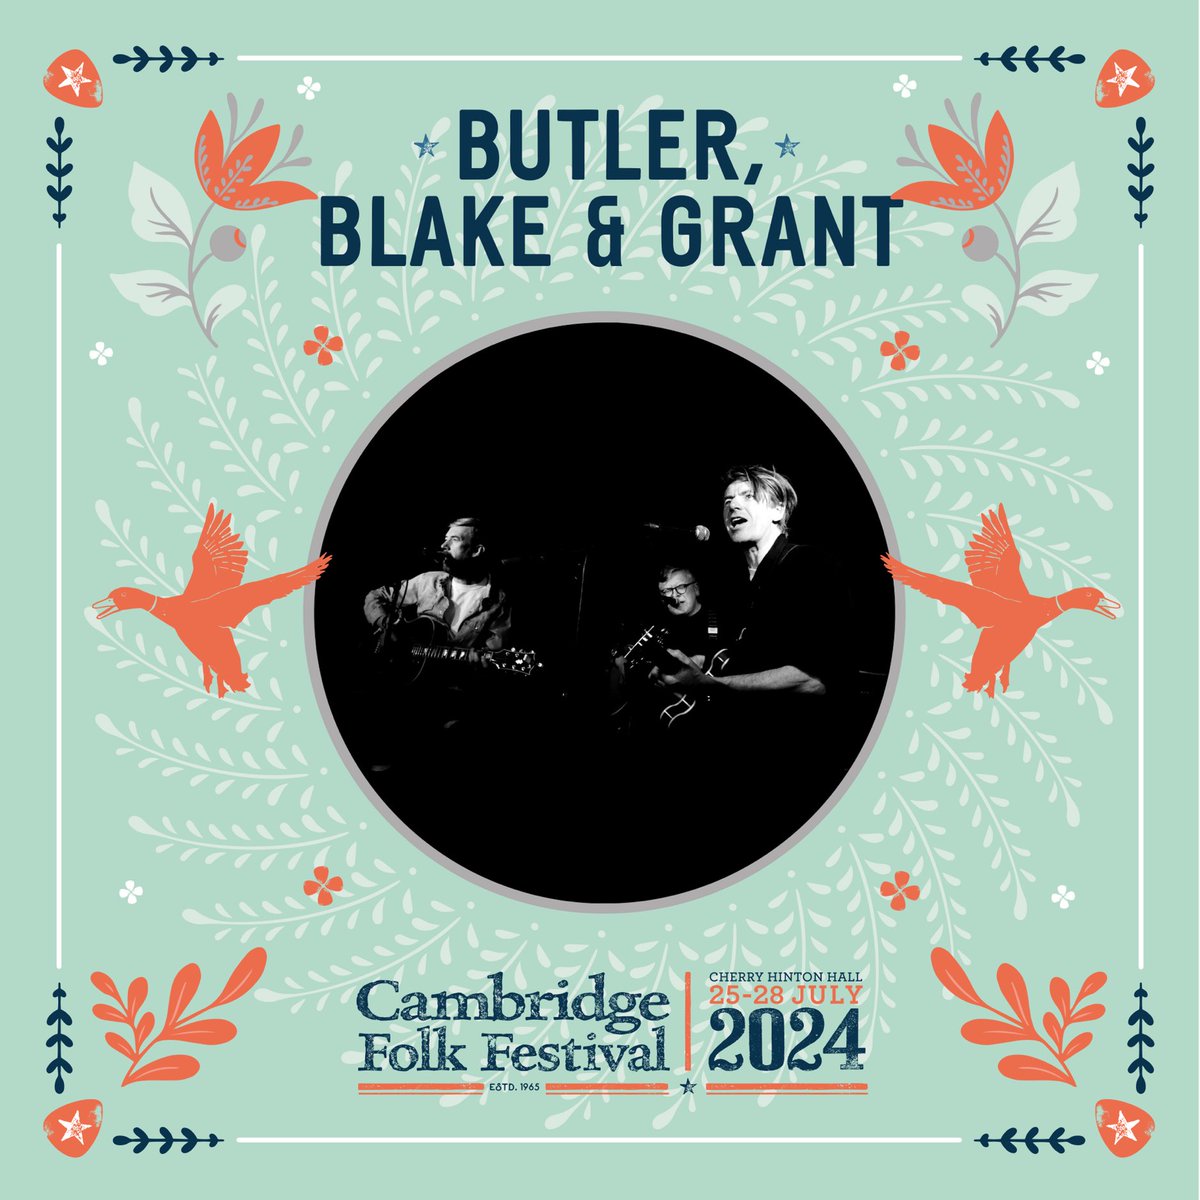 BBG happy to announce we’re playing Cambridge Folk Festival this year. Dates are 25-28 July tickets and more details: cambridgelive.org.uk/folk-festival/… #CFF2024